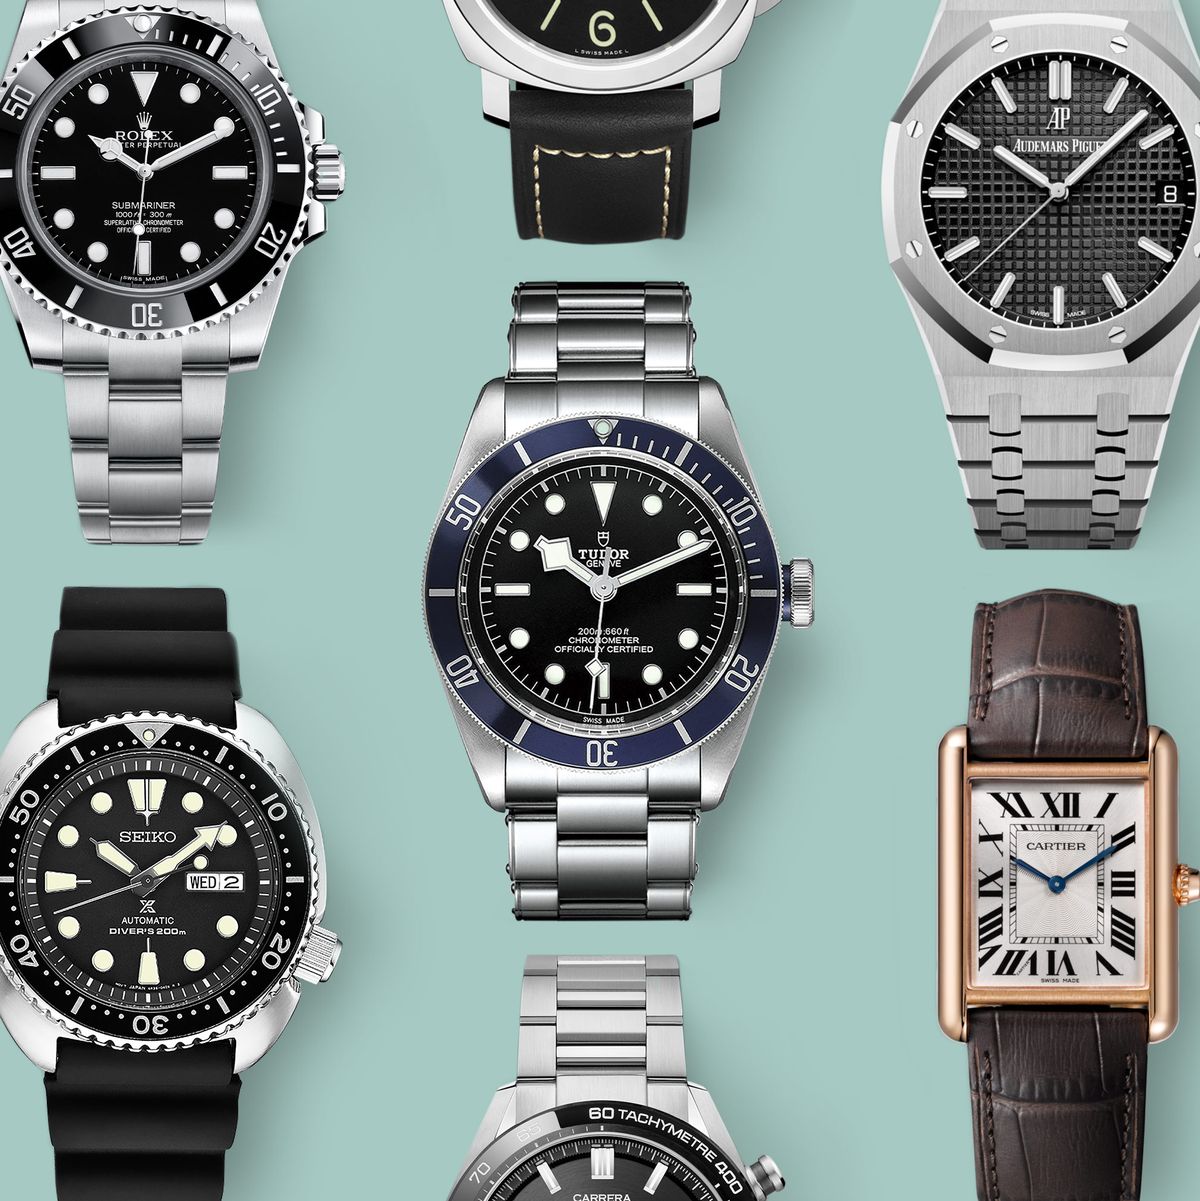 20 Affordable Swiss Watch Brands You Should Know